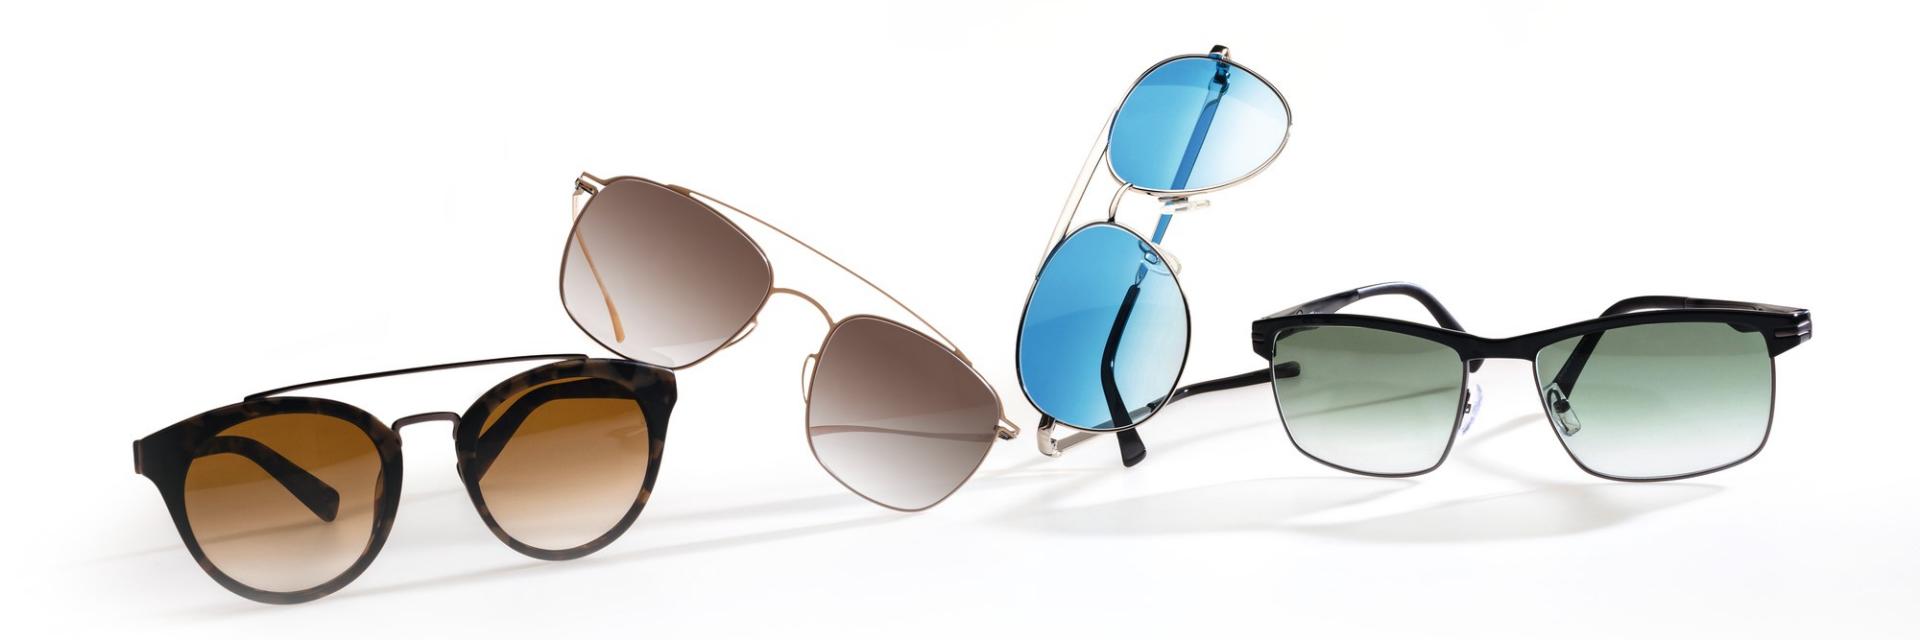 Four sunglasses with different frames and styles. The lenses of each sunglasses have a different color.